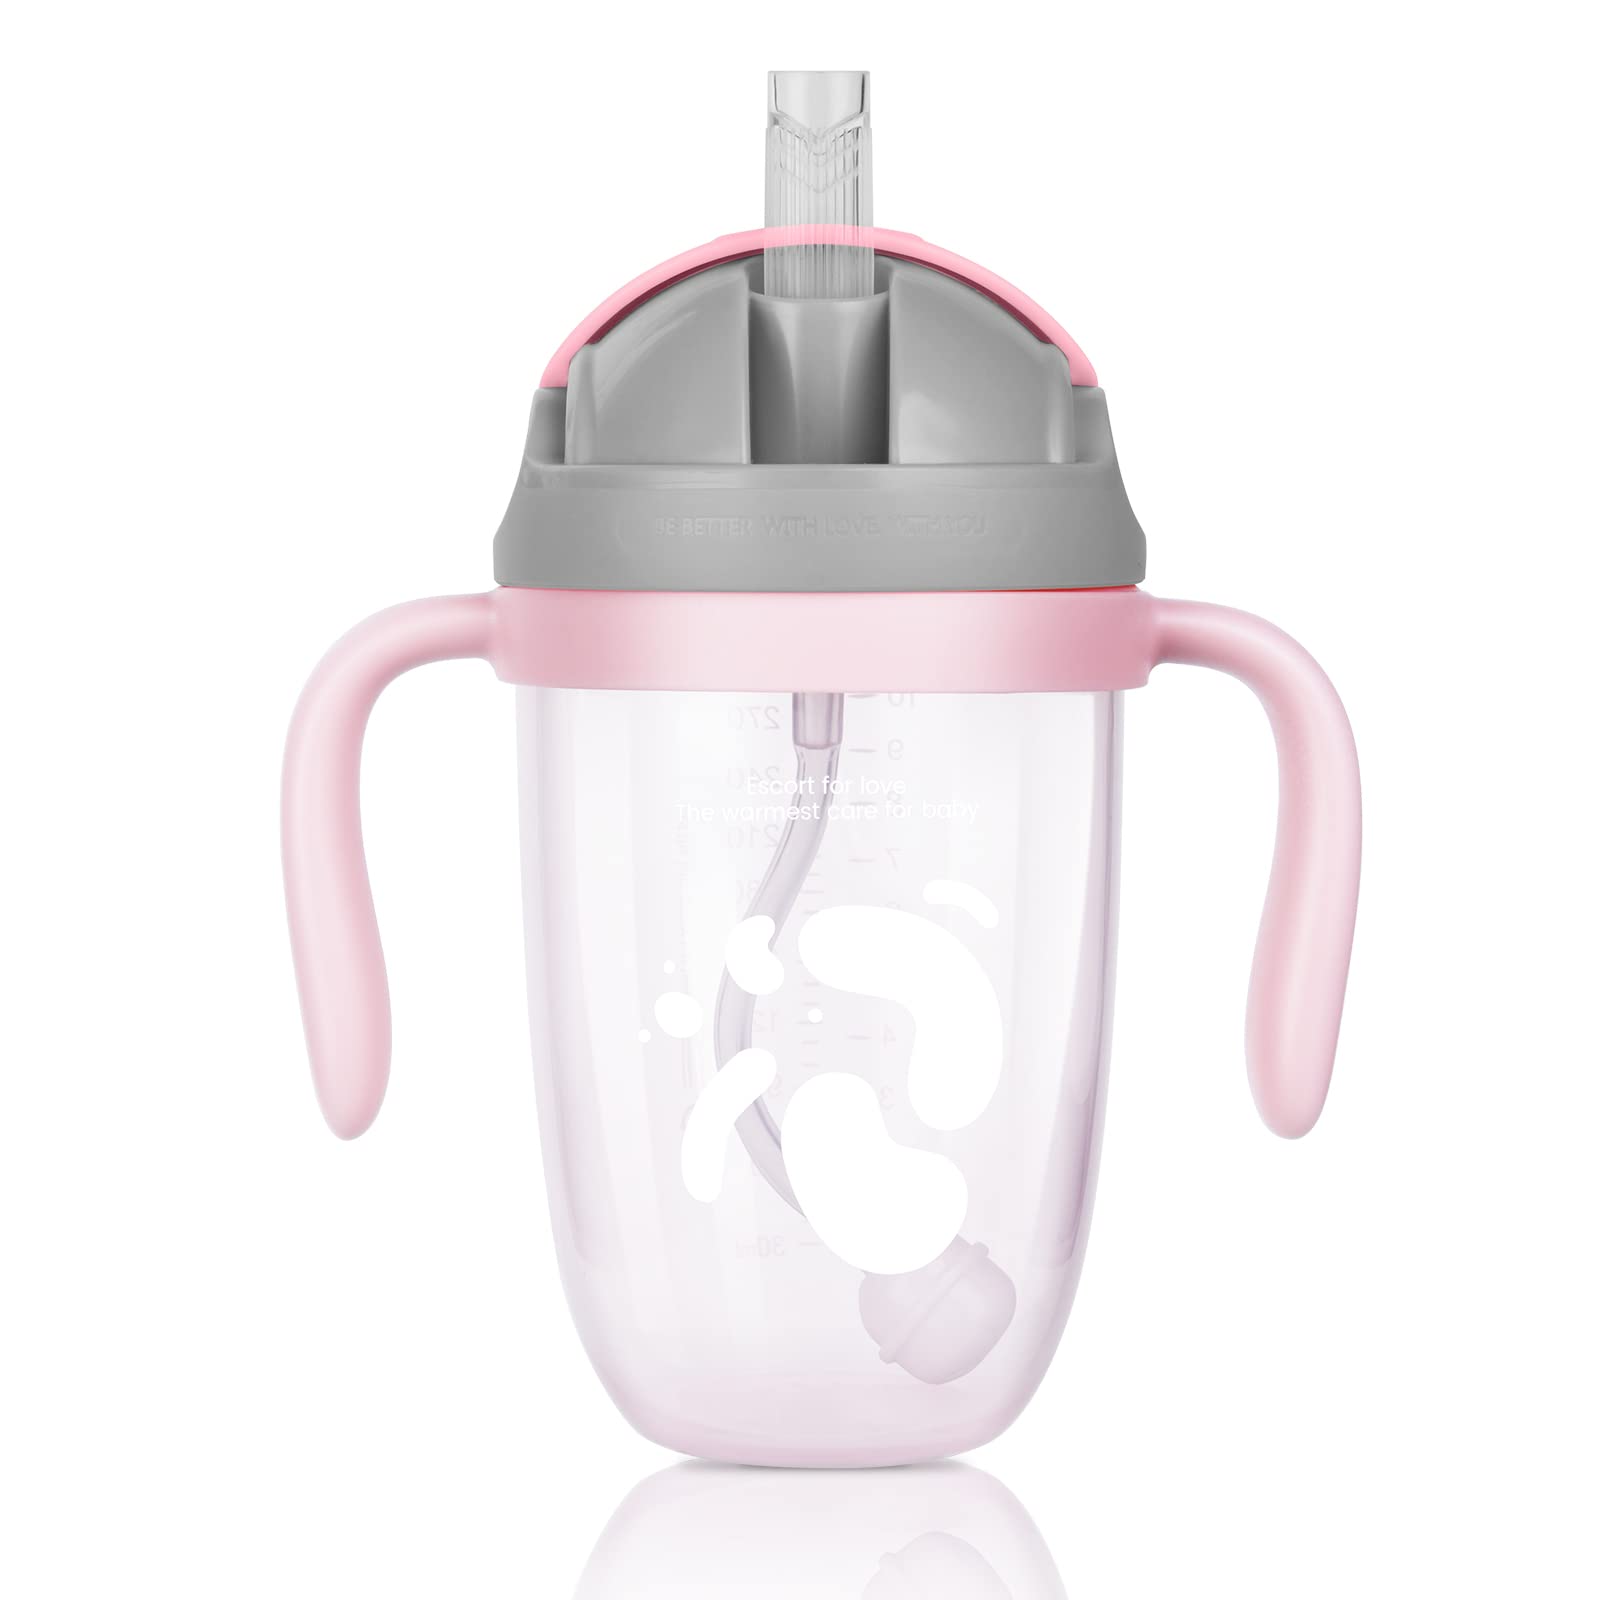 Ainiv Sippy Cup for 8+ Months Baby, Baby Cup| 300ml | Weighted Straw& Easy Grip Handles, Baby Water Bottle with Simple Flip-Top Lid,Trainer Cup for Independent Drinking, Spill-Free Toddler Cup,Pink